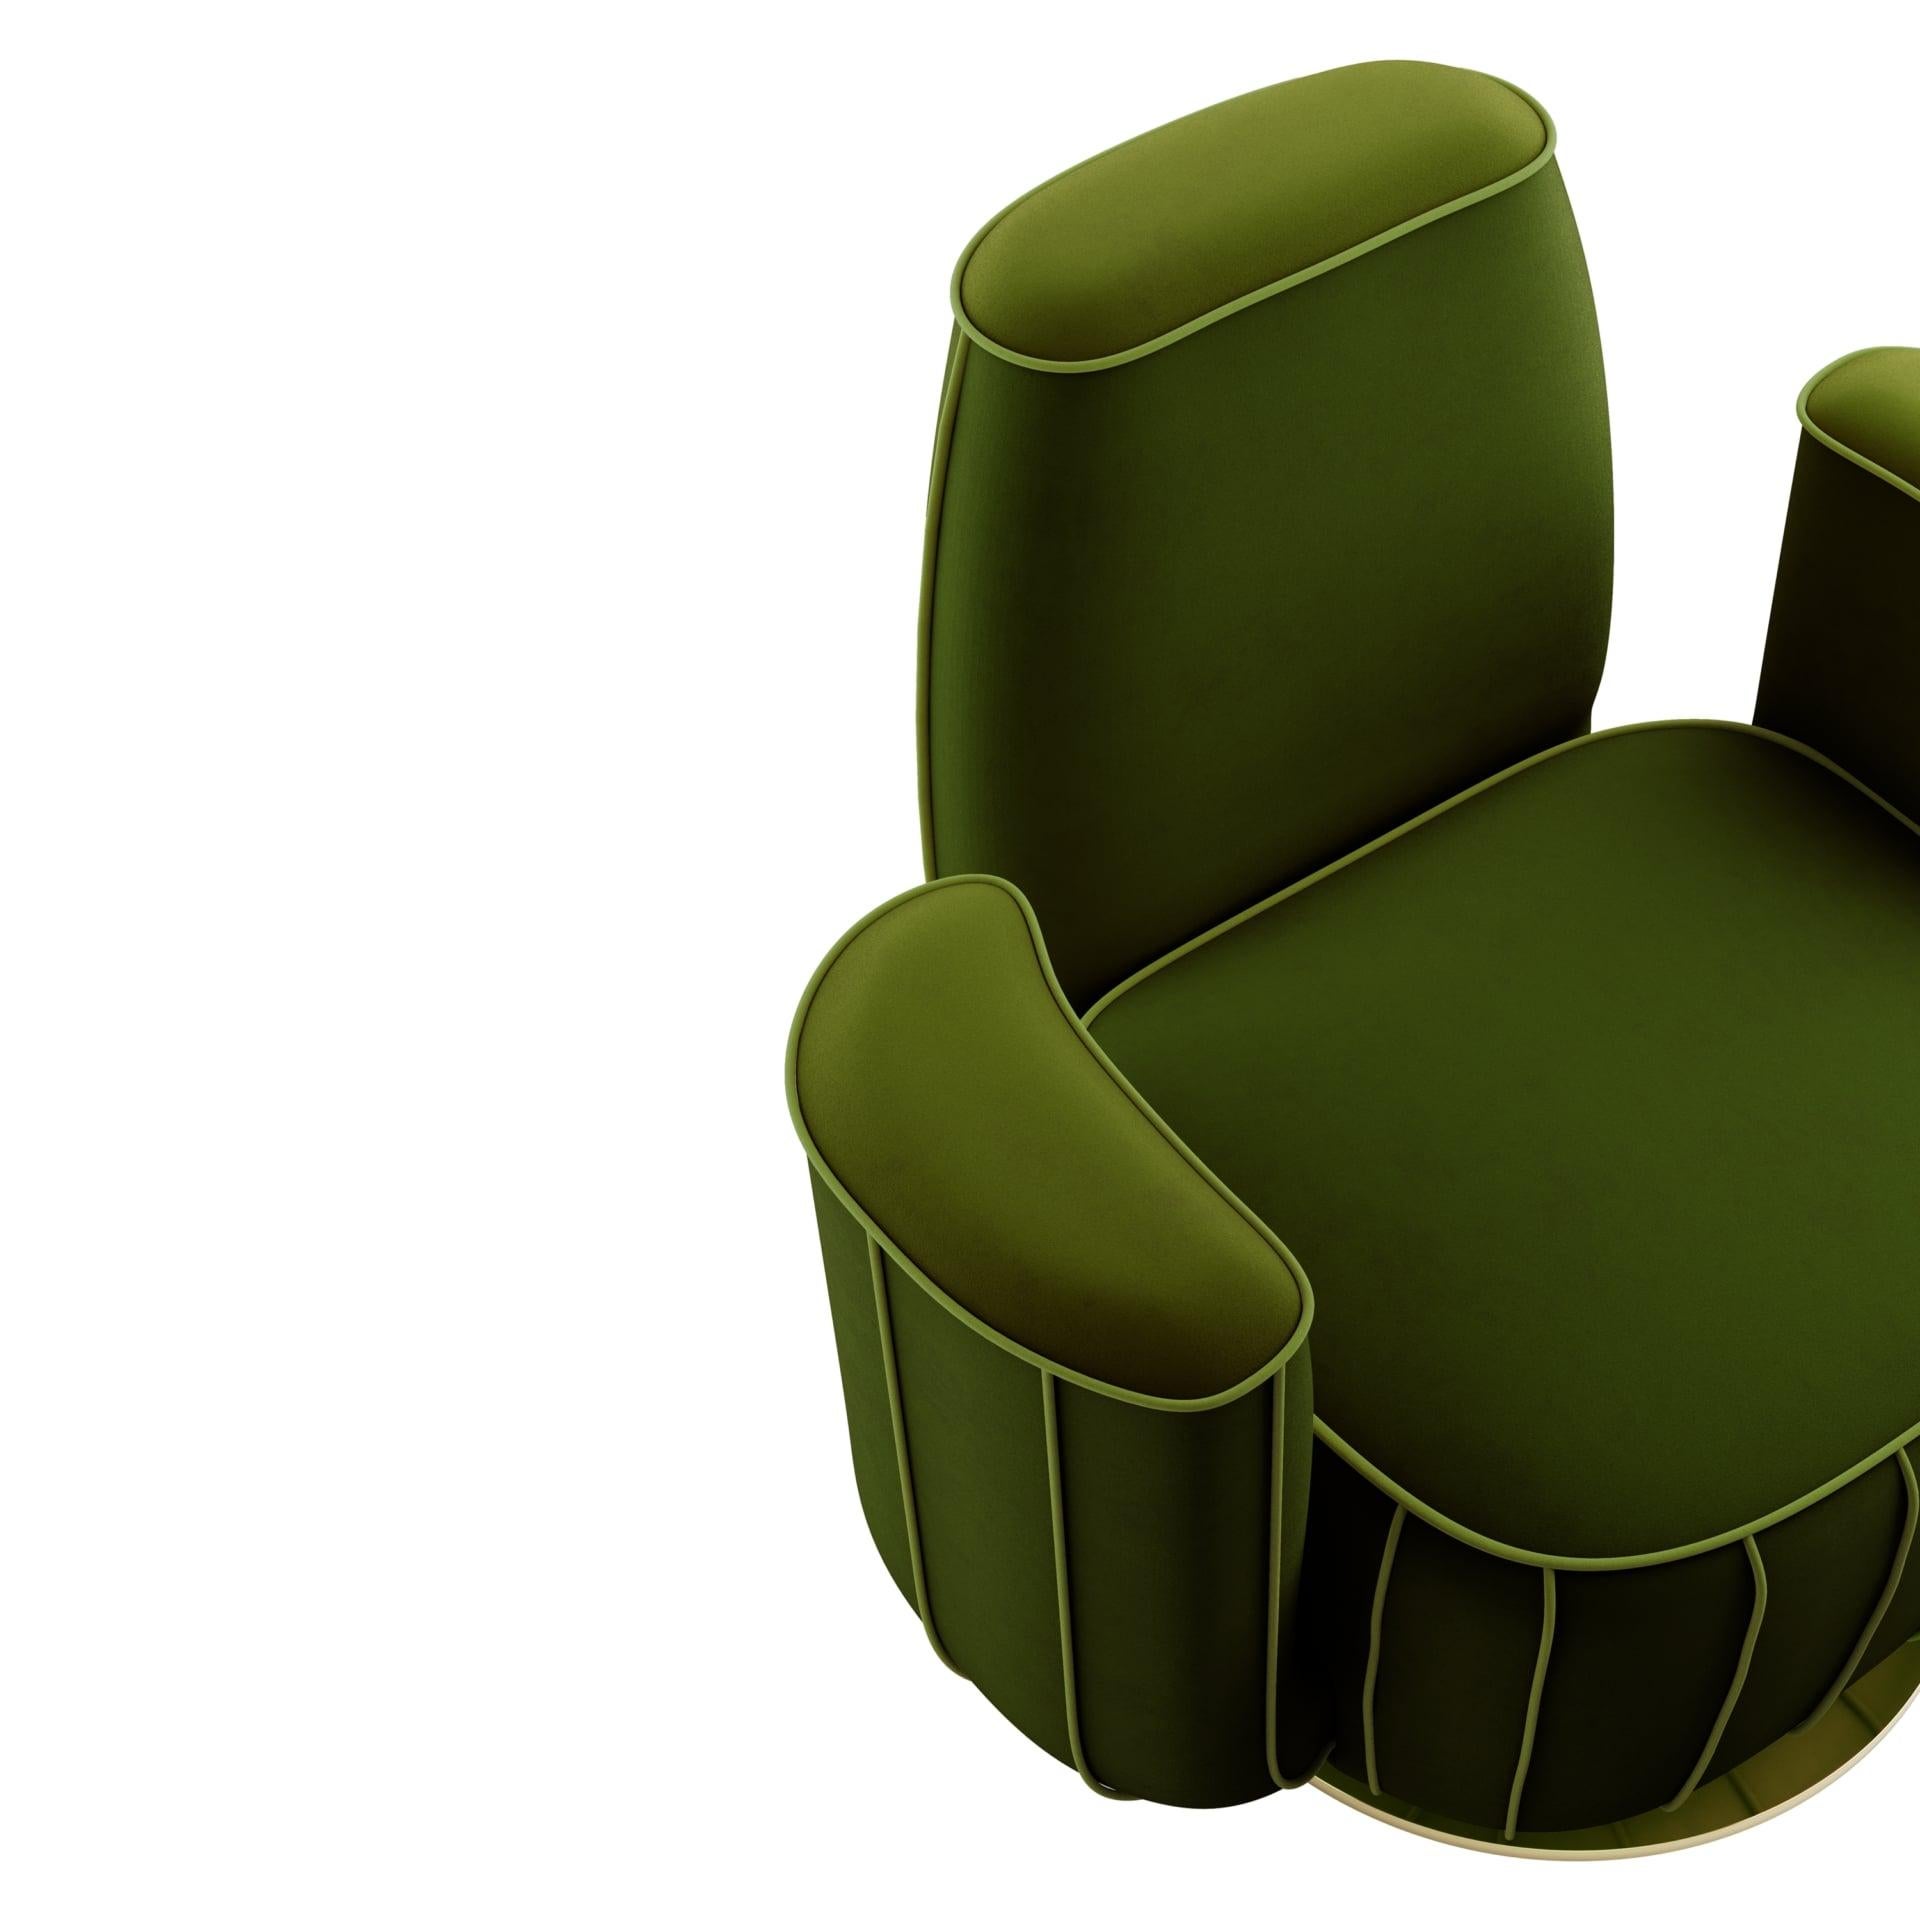 Ajui Armchair II is a conceptual piece. It’s an accent chair that combines an artsy interpretation of a cactus with the comfort expected from a luxury armchair. This modern armchair is the perfect choice for a modern living area project. A